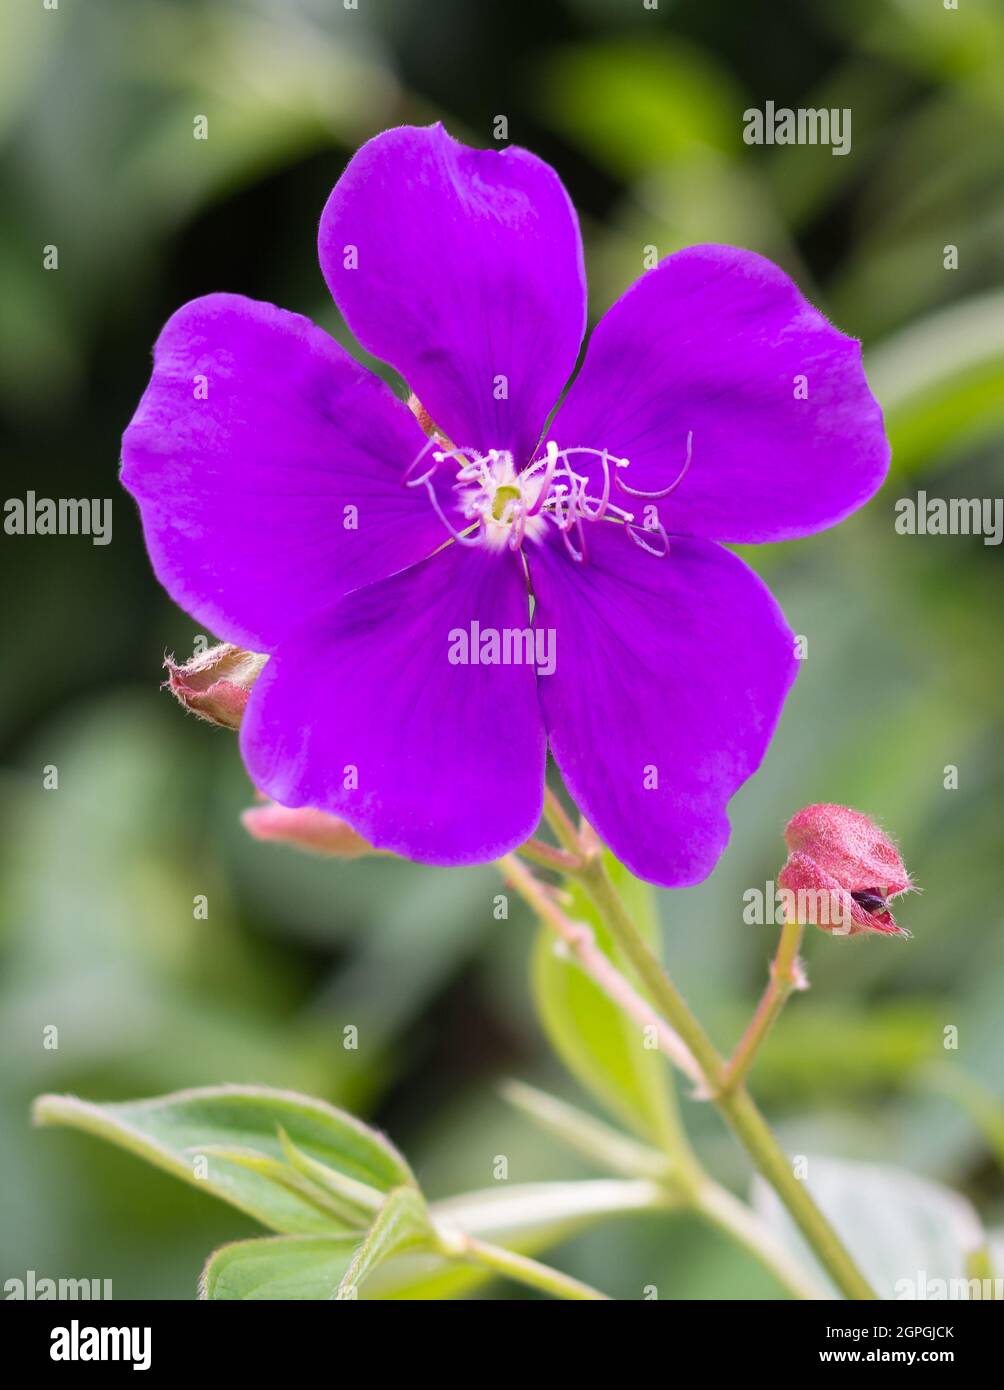 attractive purple tibouchina or lasiandra or glory bush flower with green leaves on a natural background Stock Photo